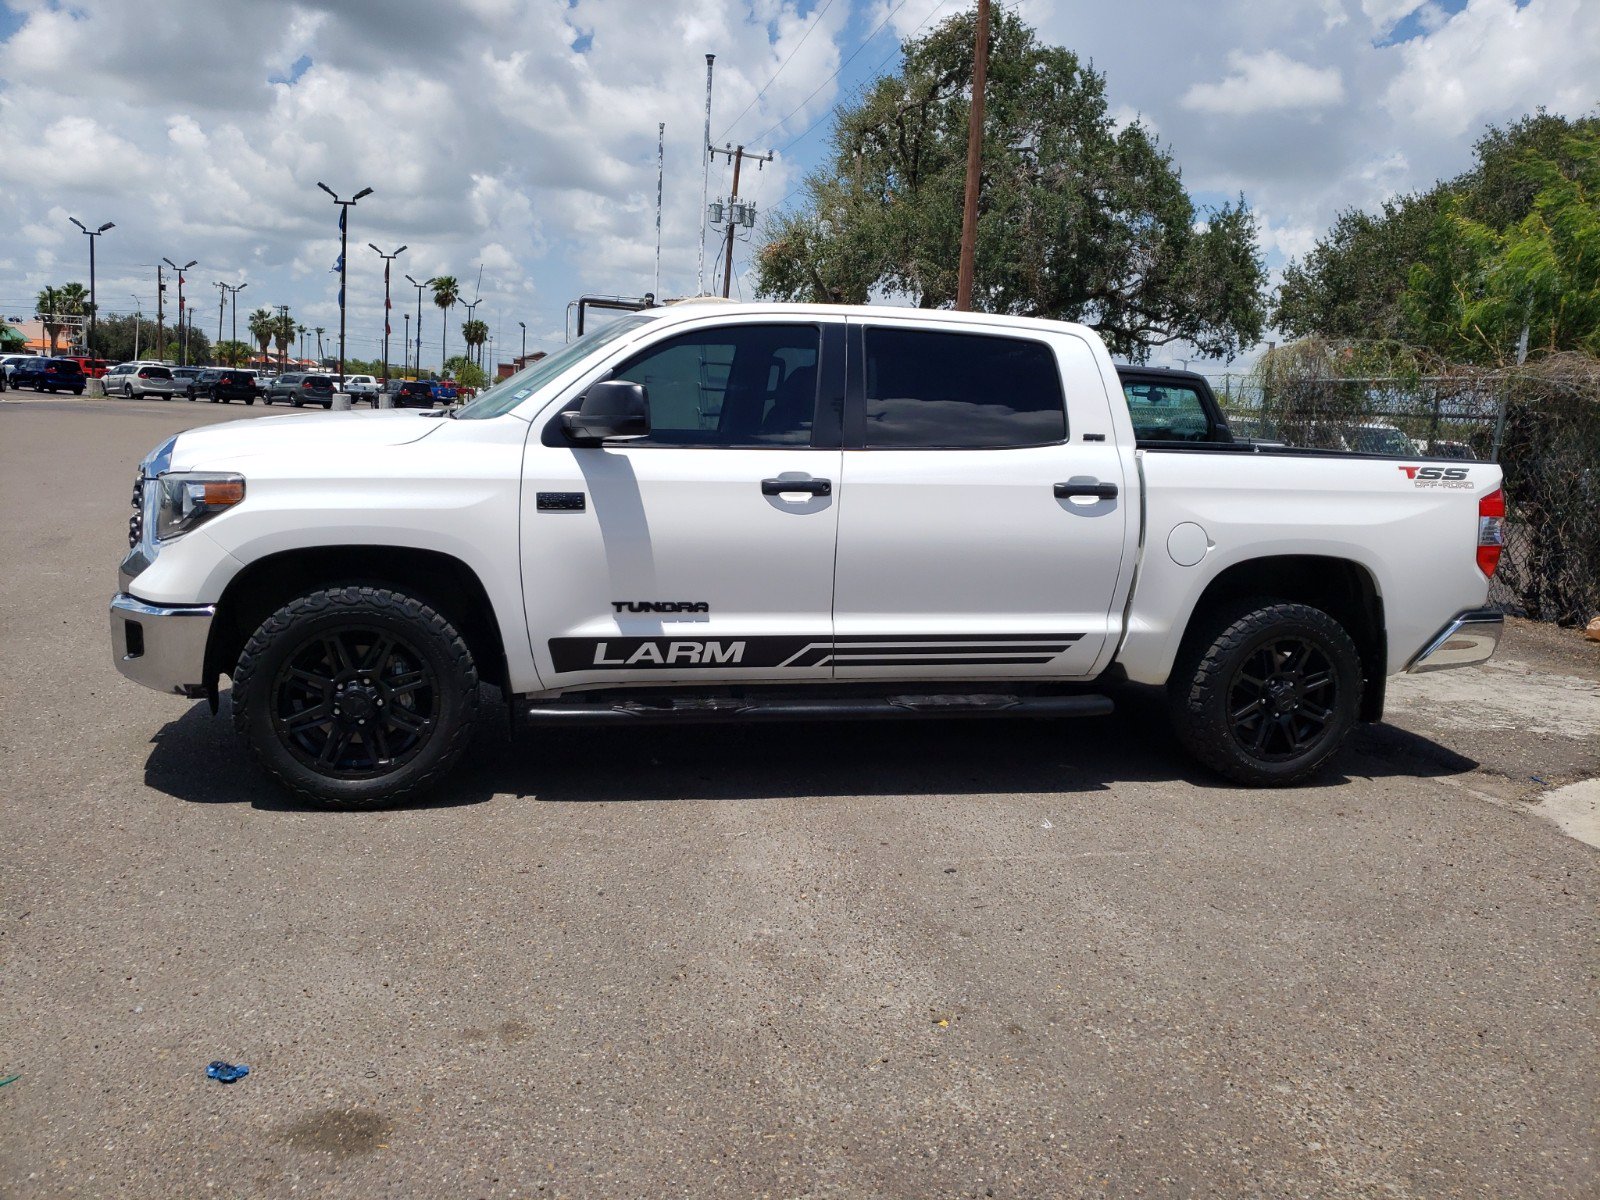 Pre-Owned 2019 Toyota Tundra 4WD SR5 Crew Cab Pickup in McAllen #20812A